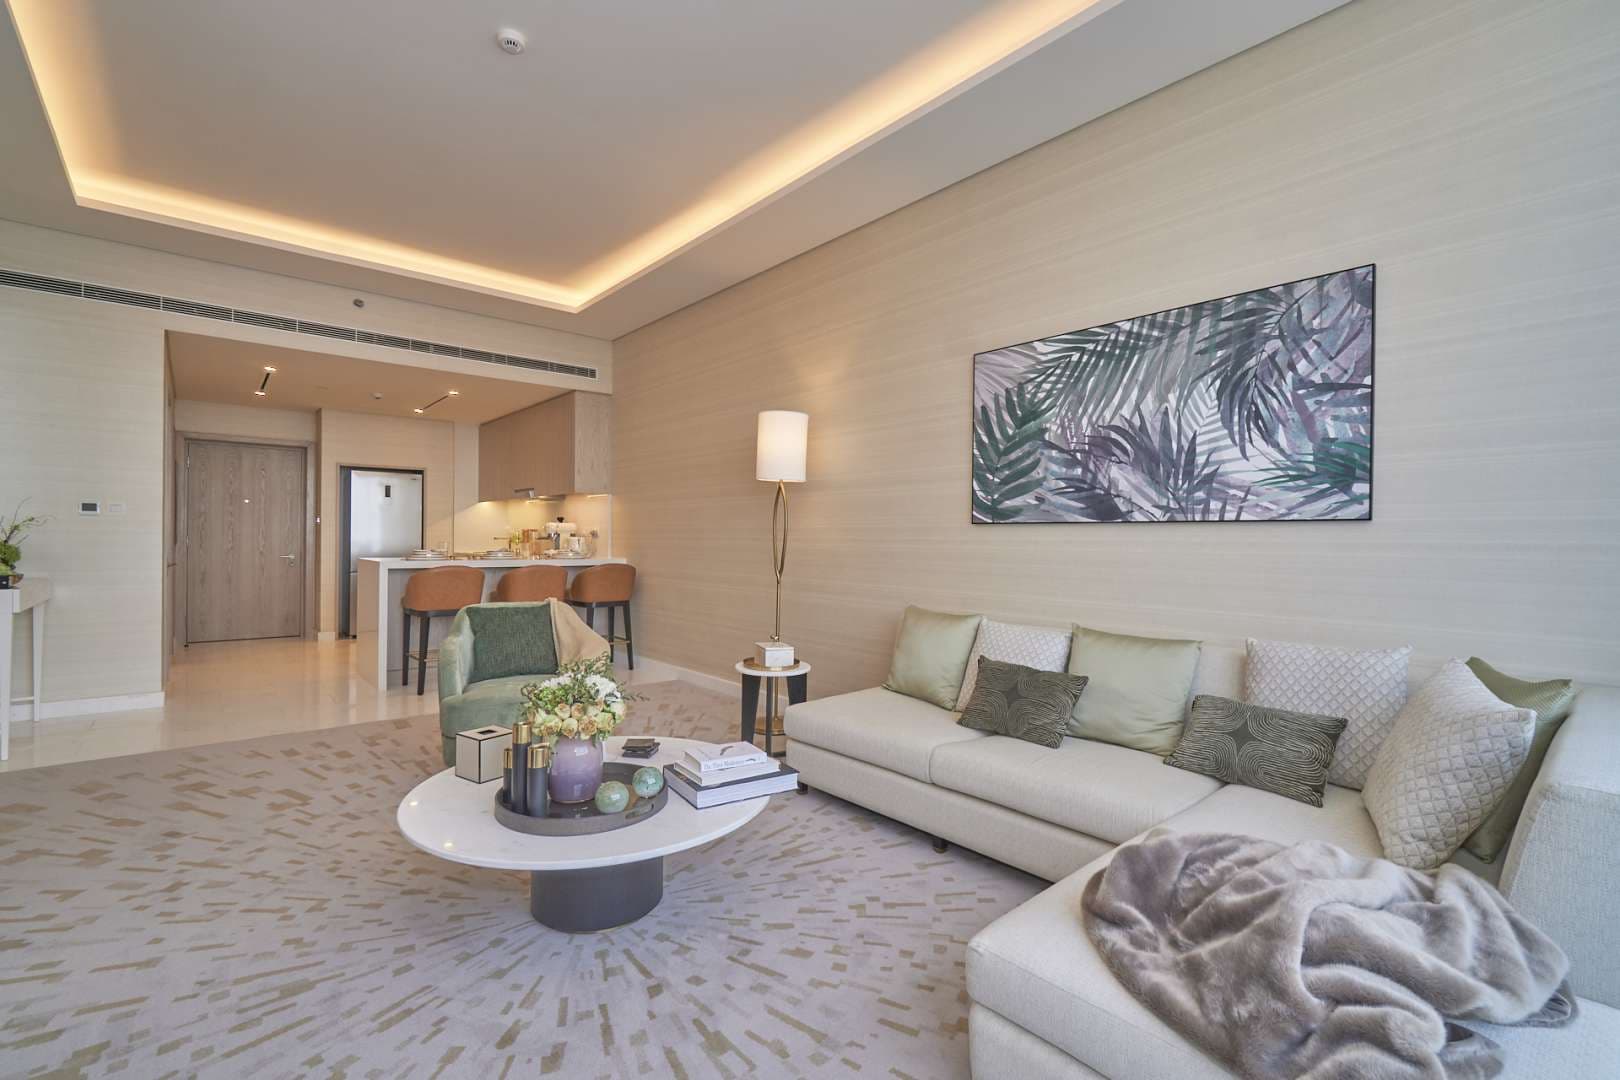 1 Bedroom Apartment For Sale The Palm Tower Lp07367 2d8b26feaf594400.jpg